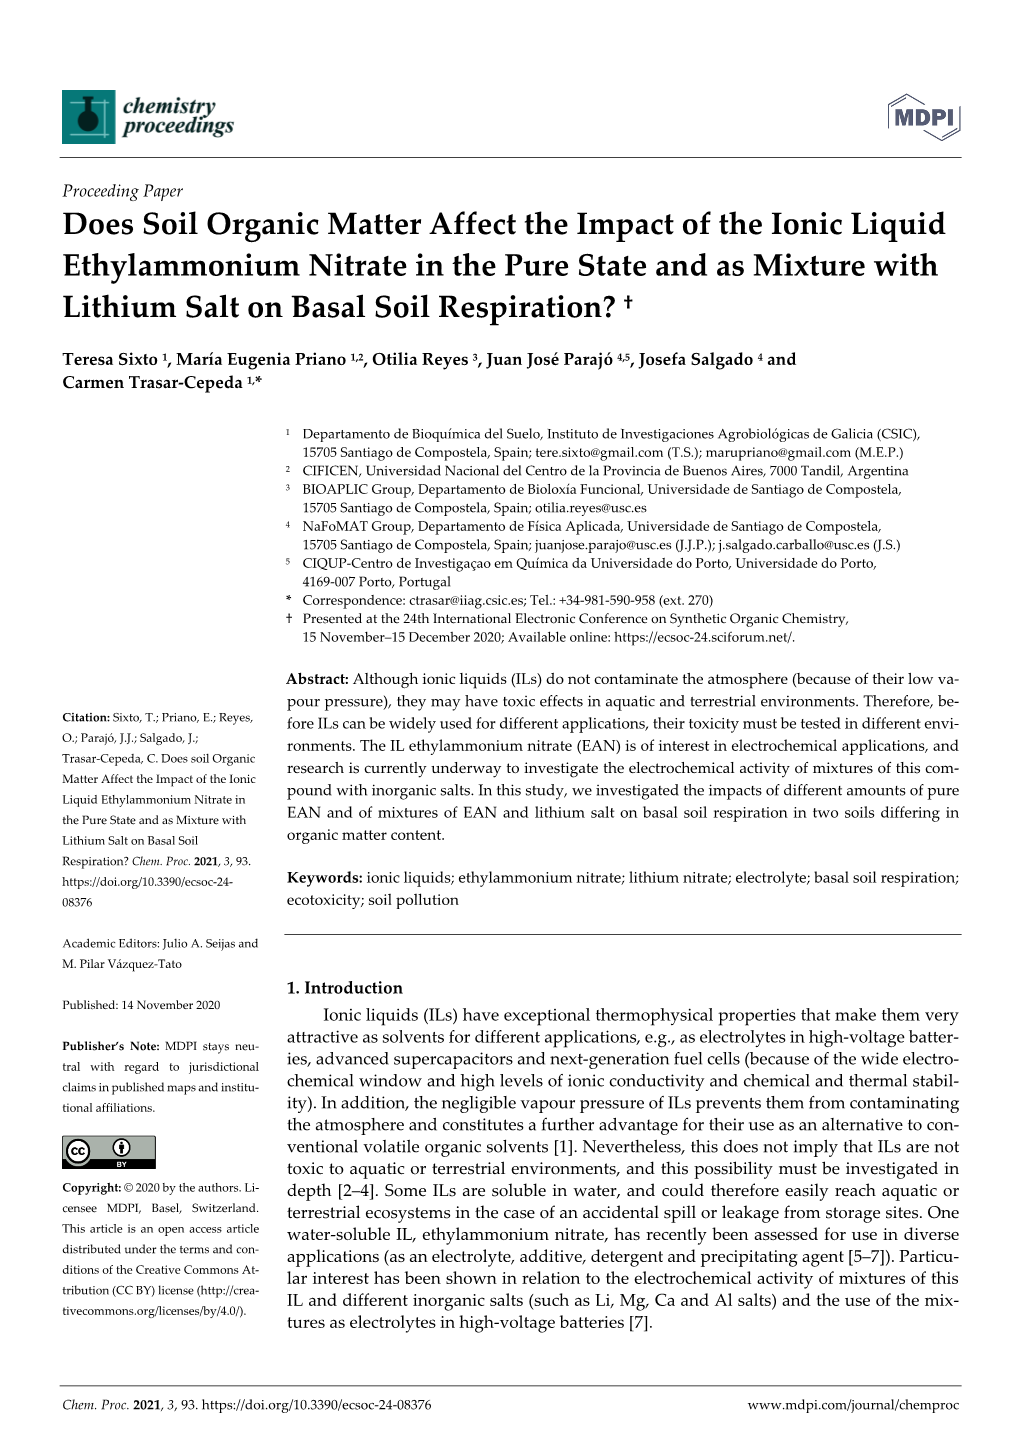 Does Soil Organic Matter Affect the Impact of the Ionic Liquid Ethylammonium Nitrate in the Pure State and As Mixture with Lithium Salt on Basal Soil Respiration? †